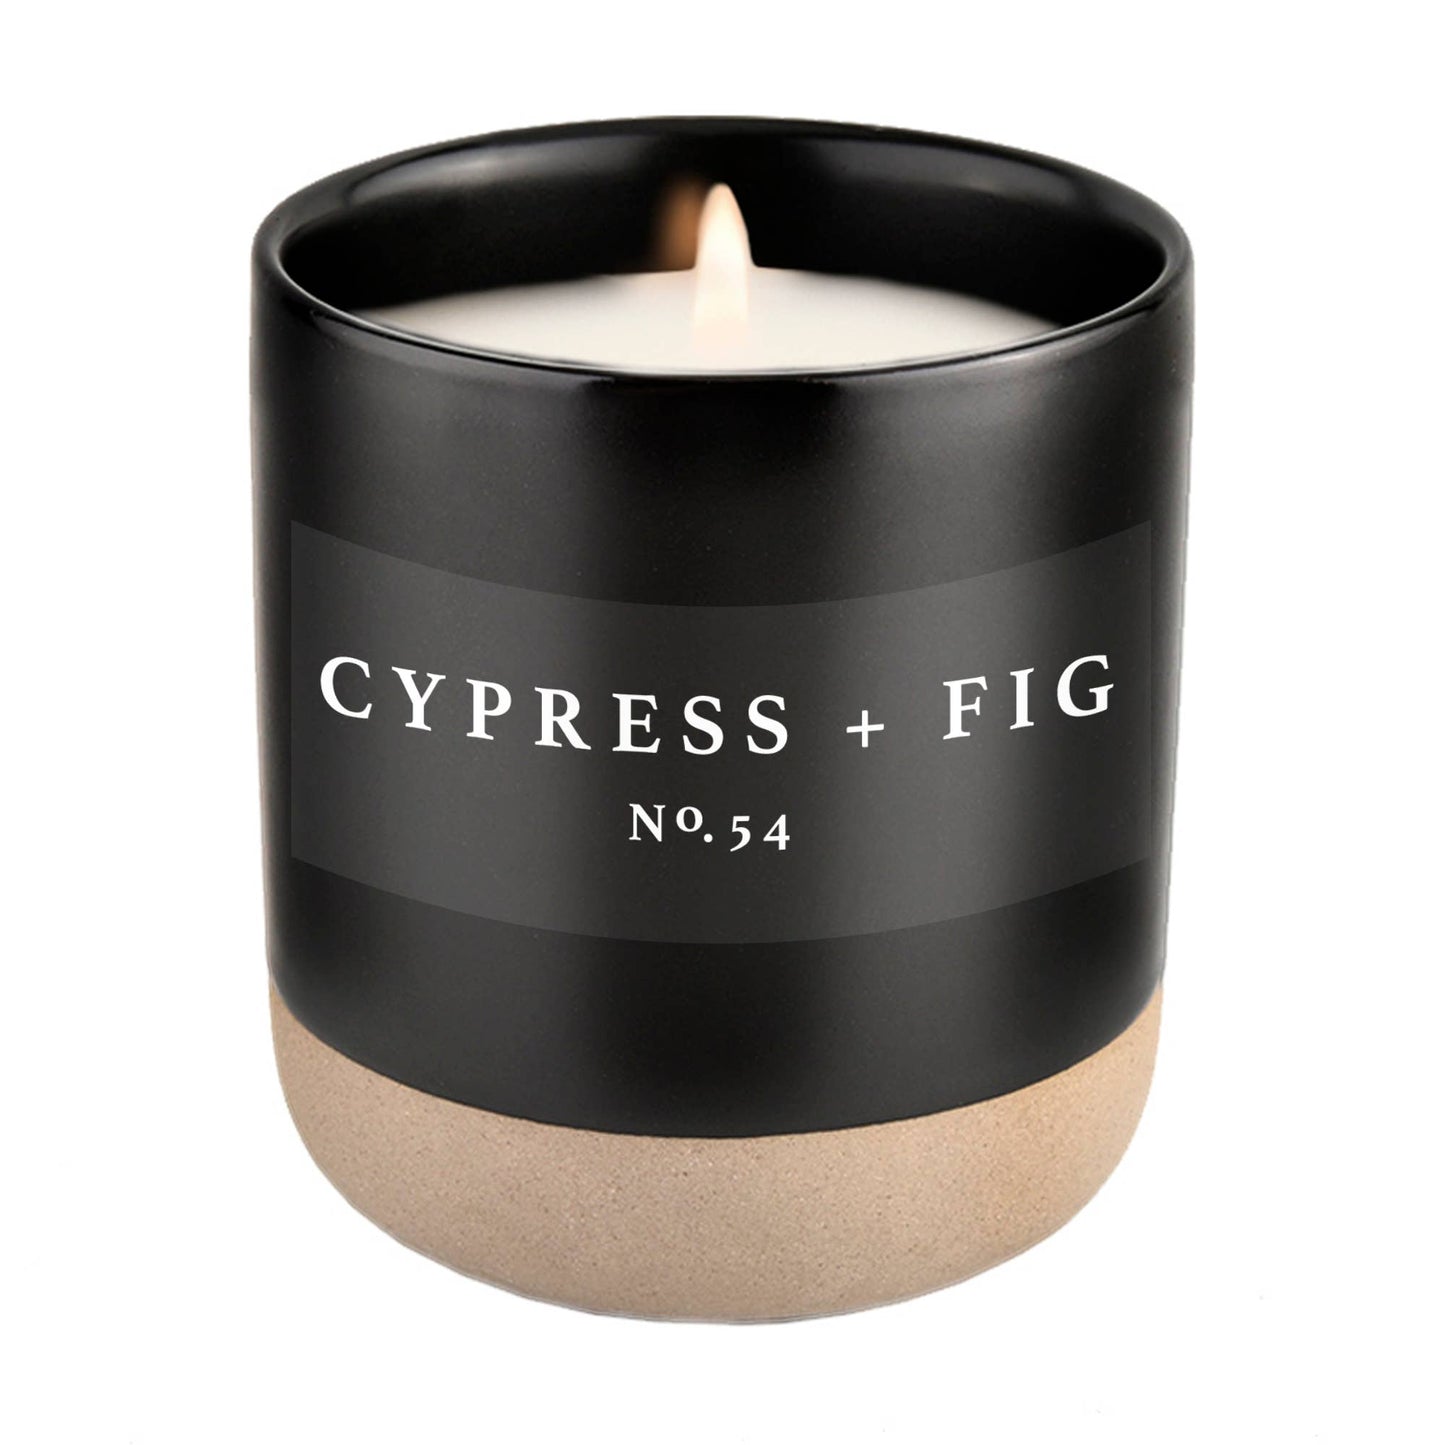 Sweet Water Decor - Cypress and Fig Soy Candle - Black Stoneware Jar - 12 oz